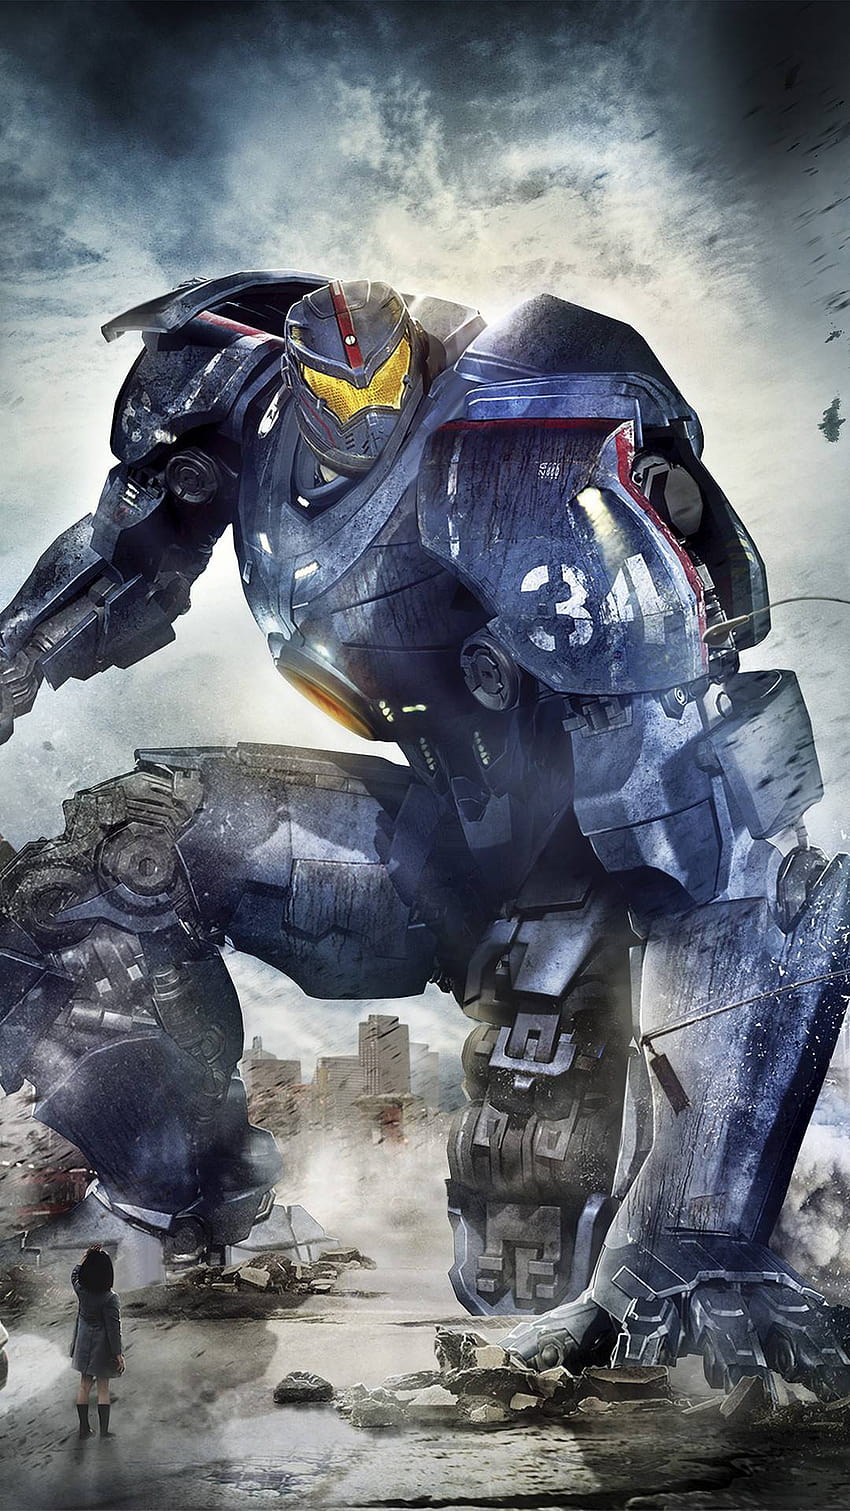 This Preview, pacific rim phone HD phone wallpaper